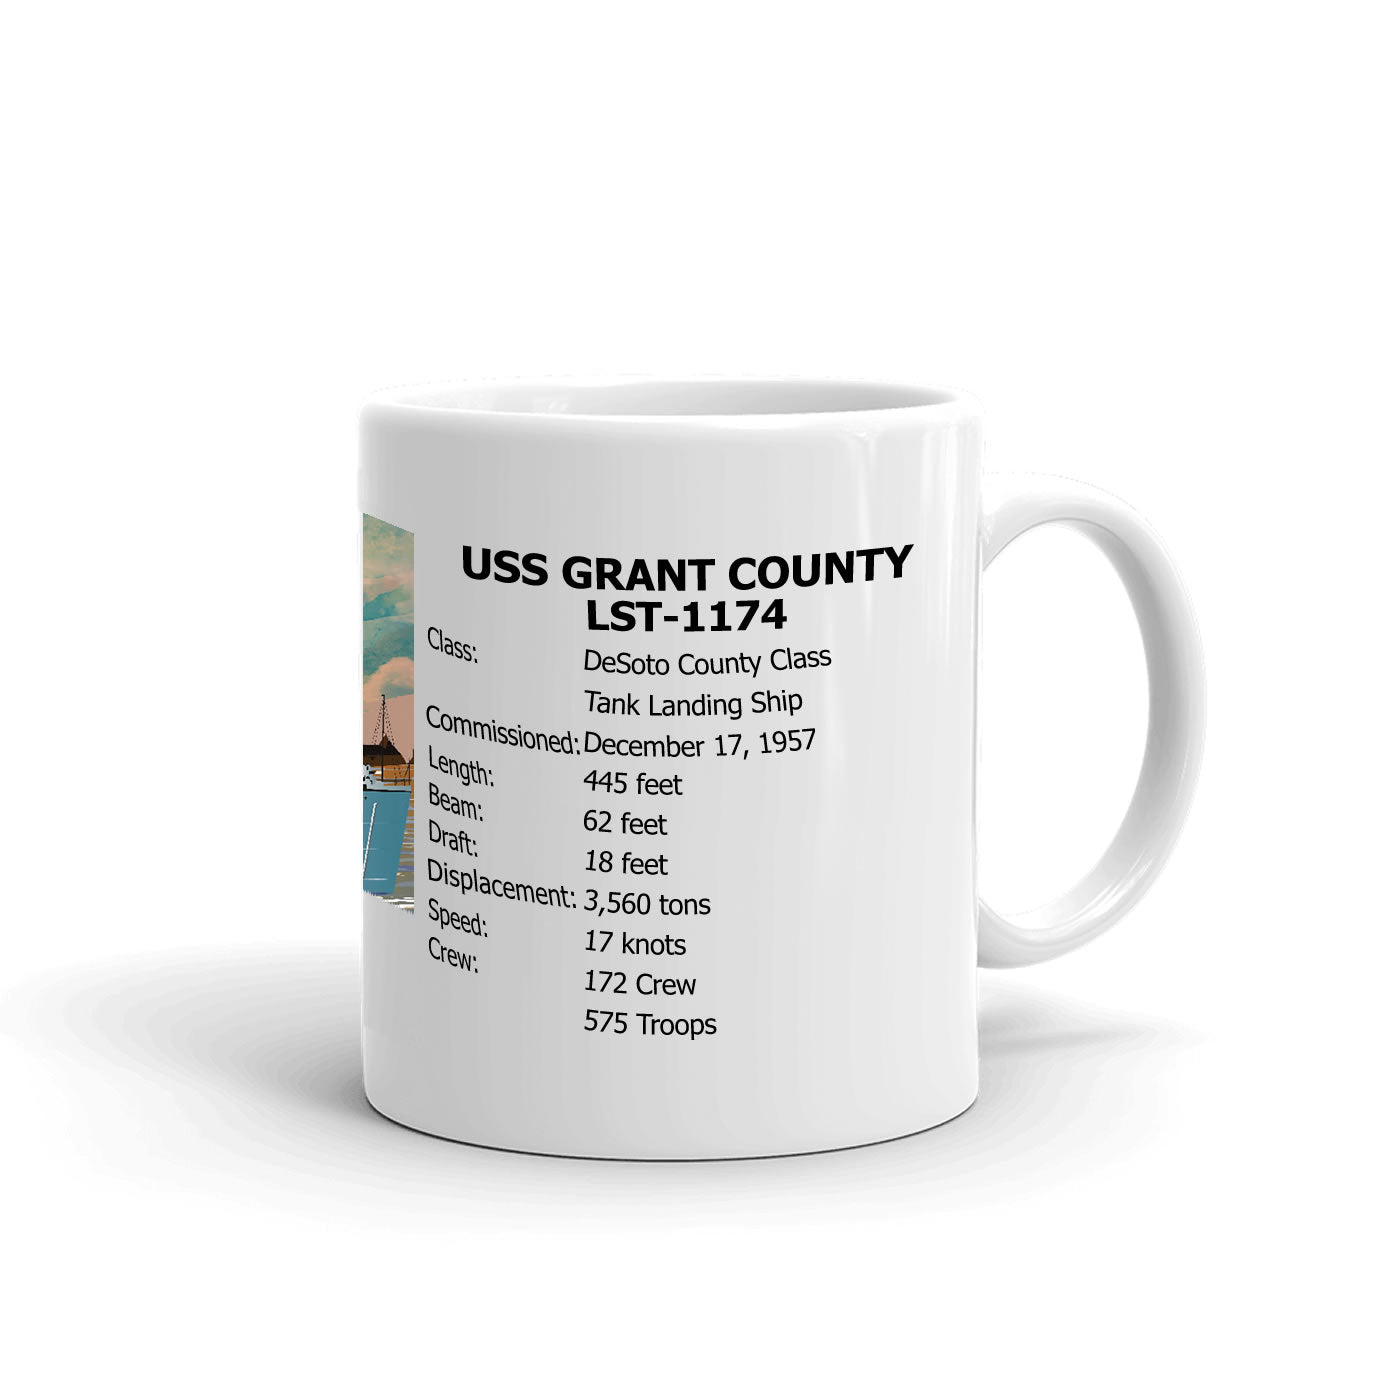 USS Grant County LST-1174 Coffee Cup Mug Right Handle